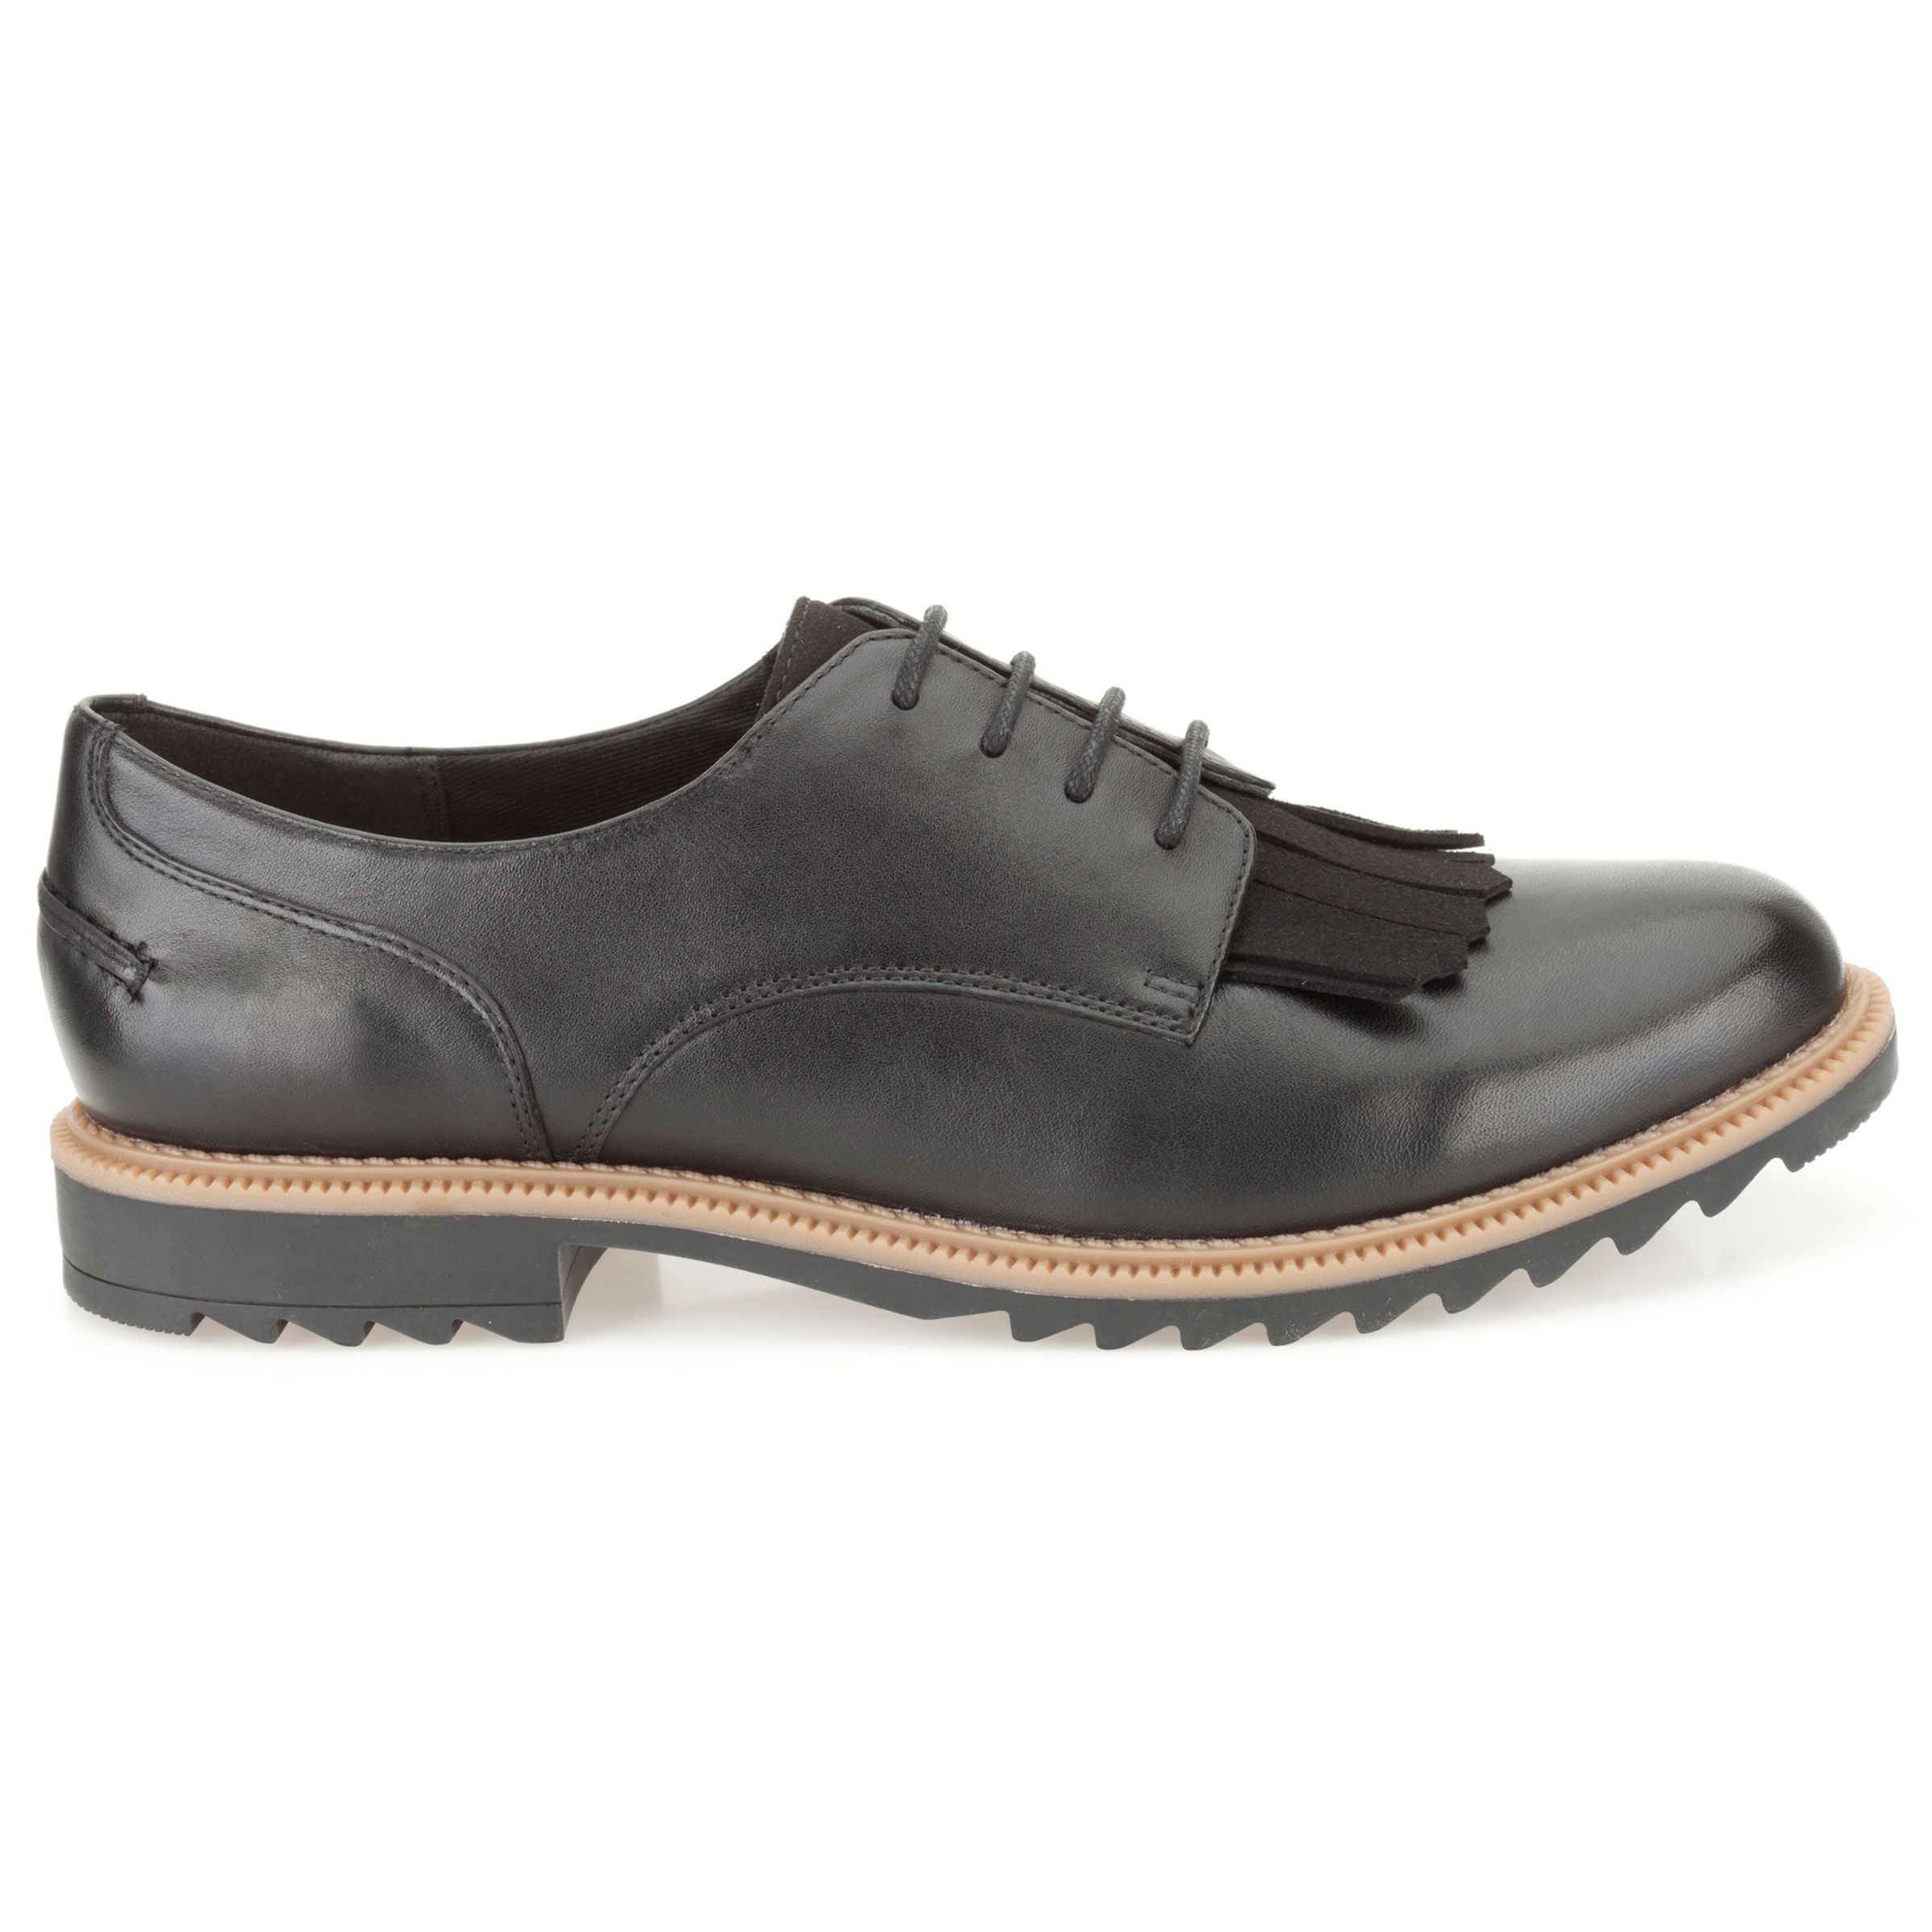 Clarks Griffin Mabel Tassel Brogues at 